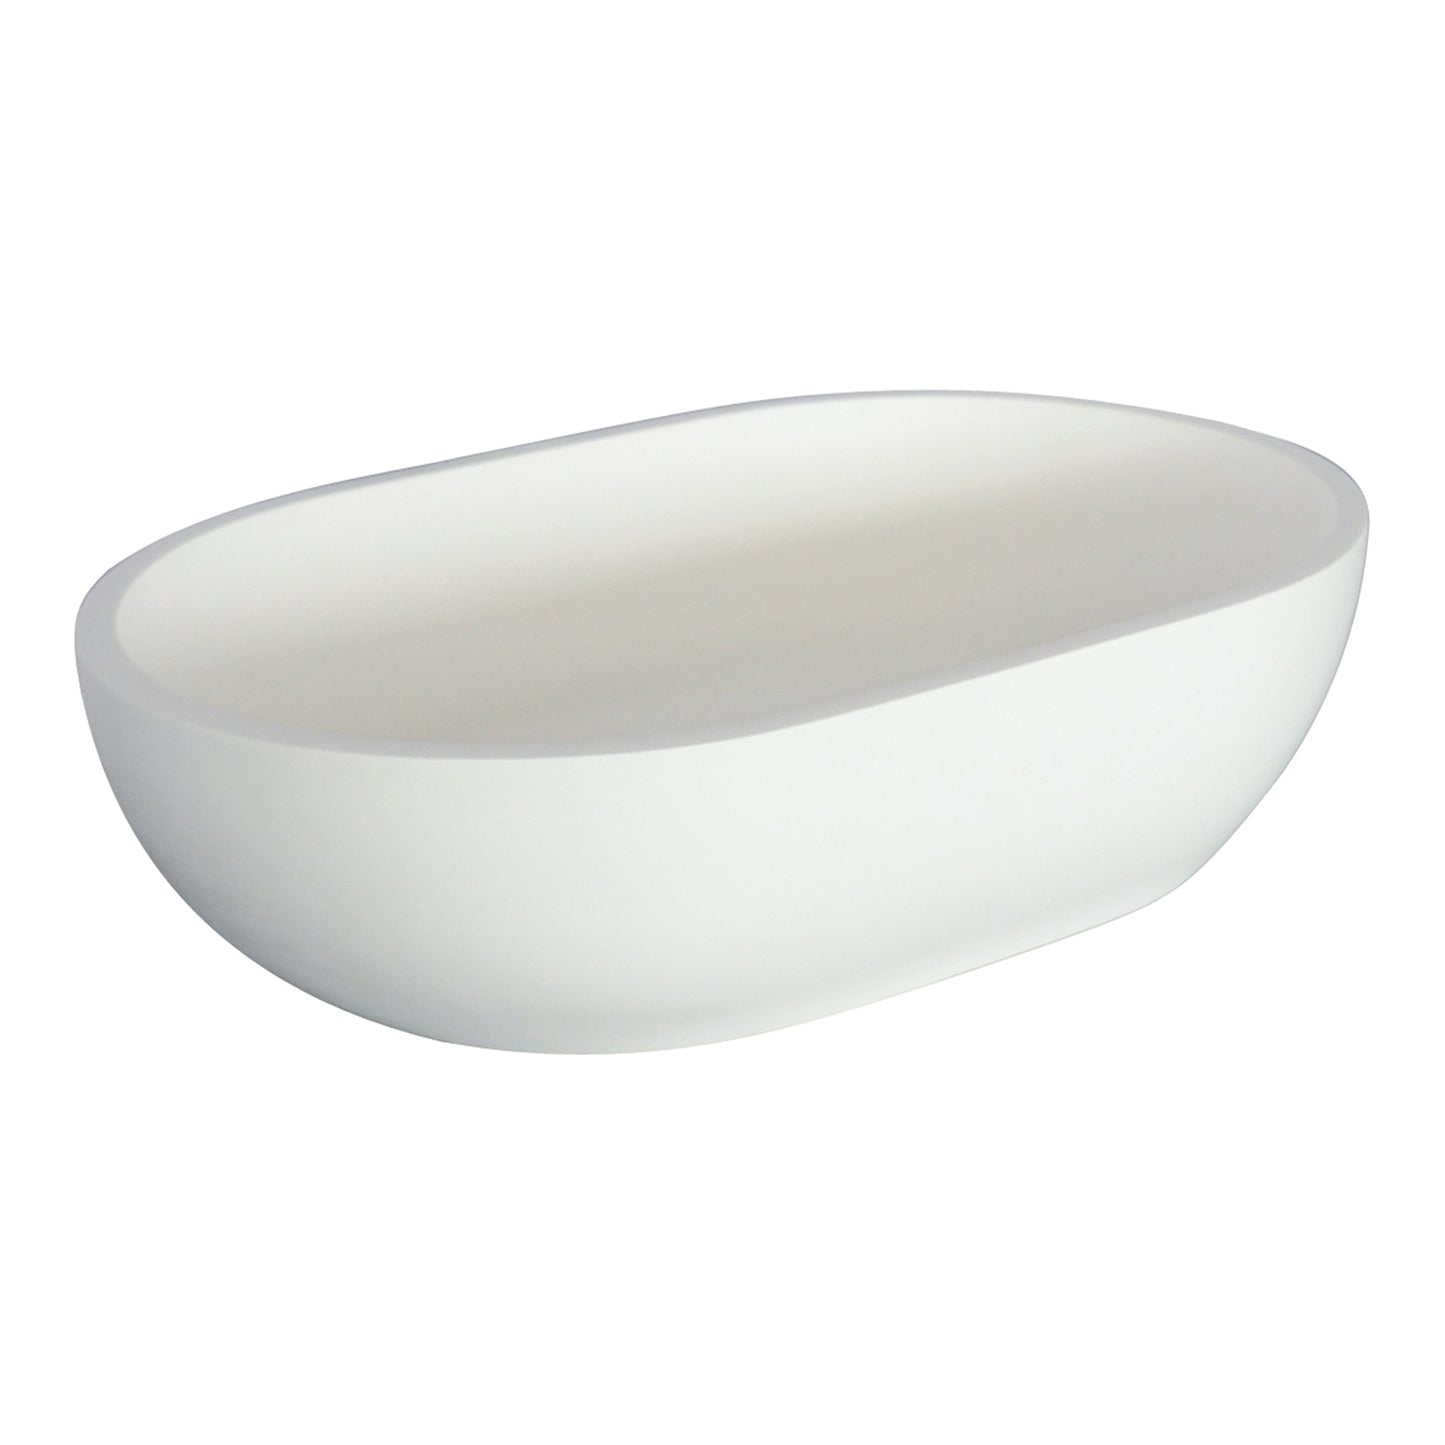 Divina Resin Vessel Sink 23" x 15" Oval with Gloss White Finish